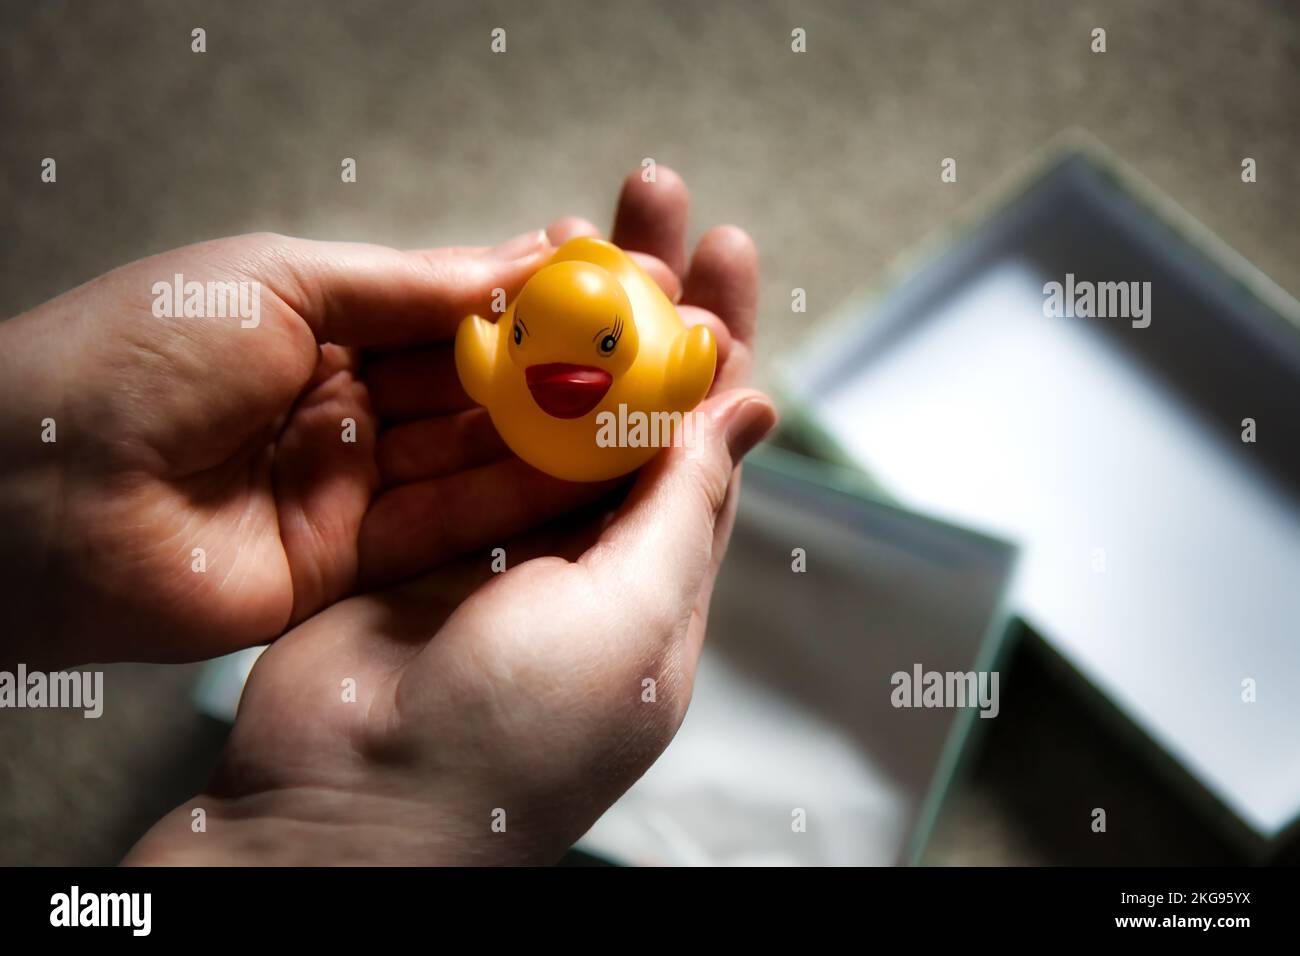 Rubber duck gift at christmas Stock Photo